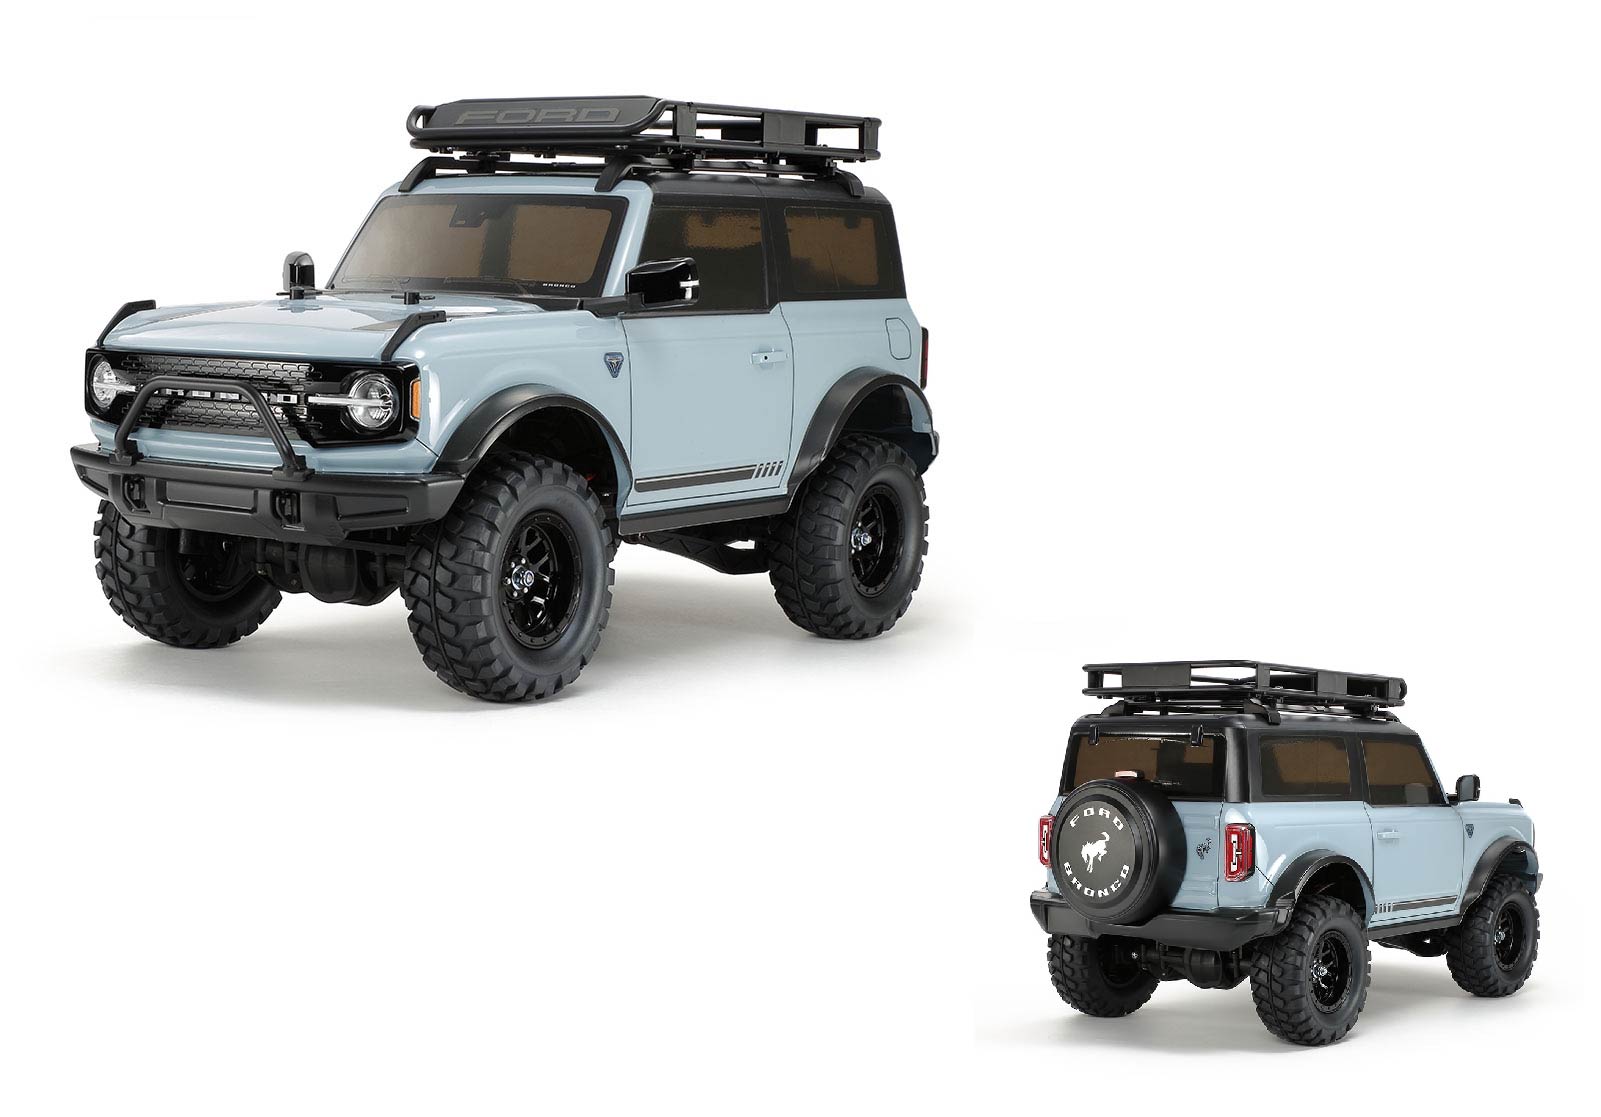 The New 1:10th Scale Ford Bronco R/C Car From Tamiya